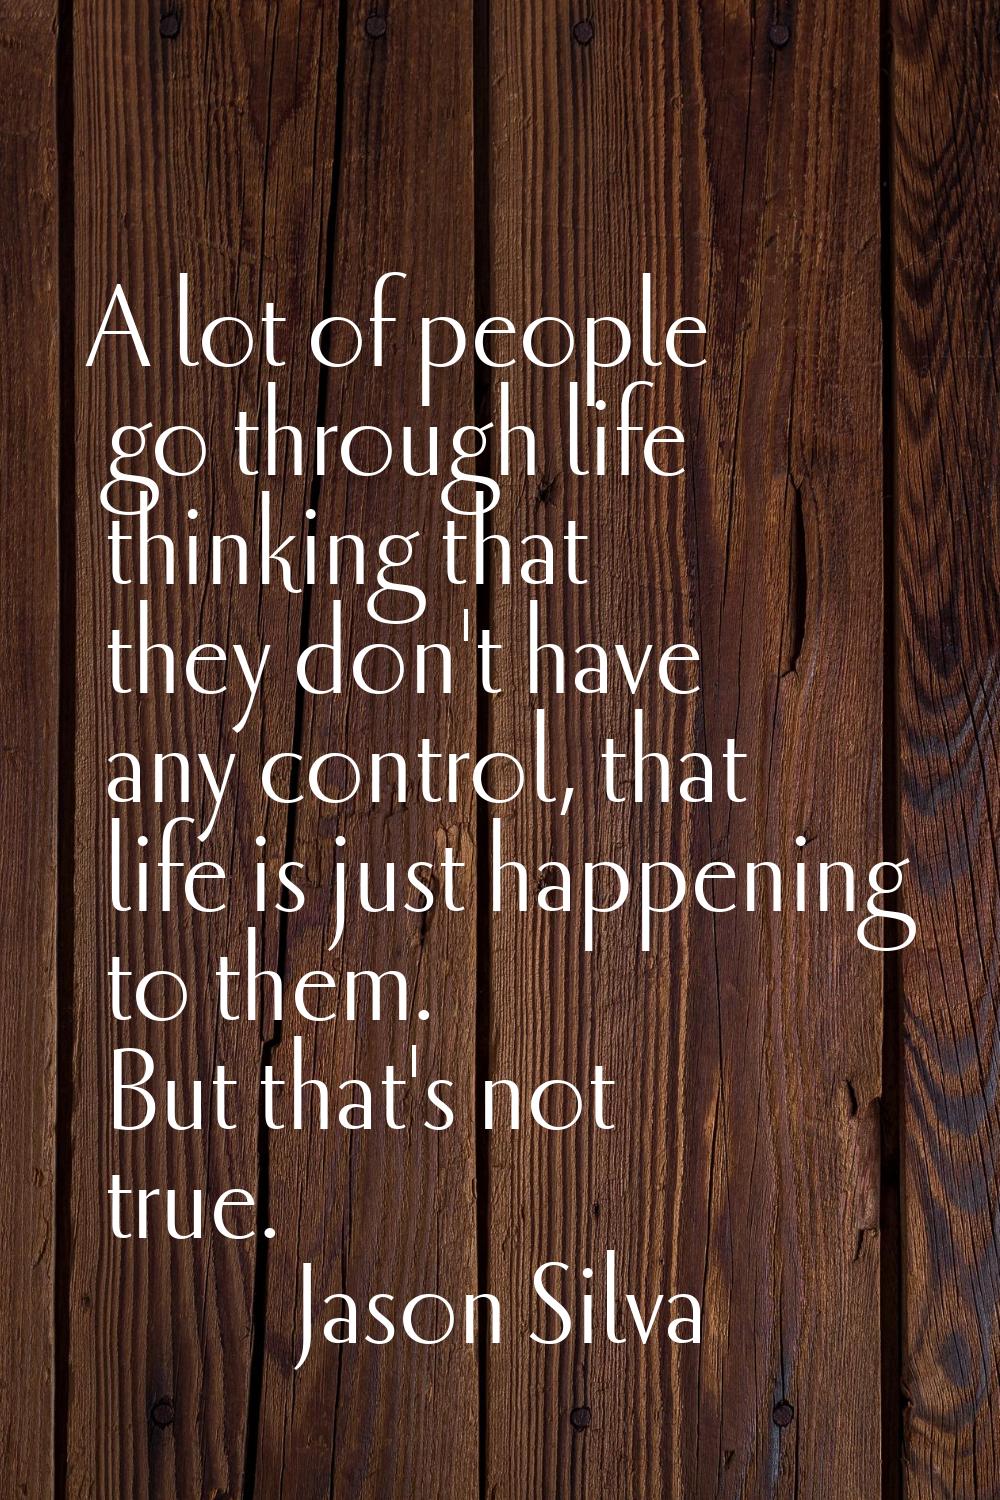 A lot of people go through life thinking that they don't have any control, that life is just happen